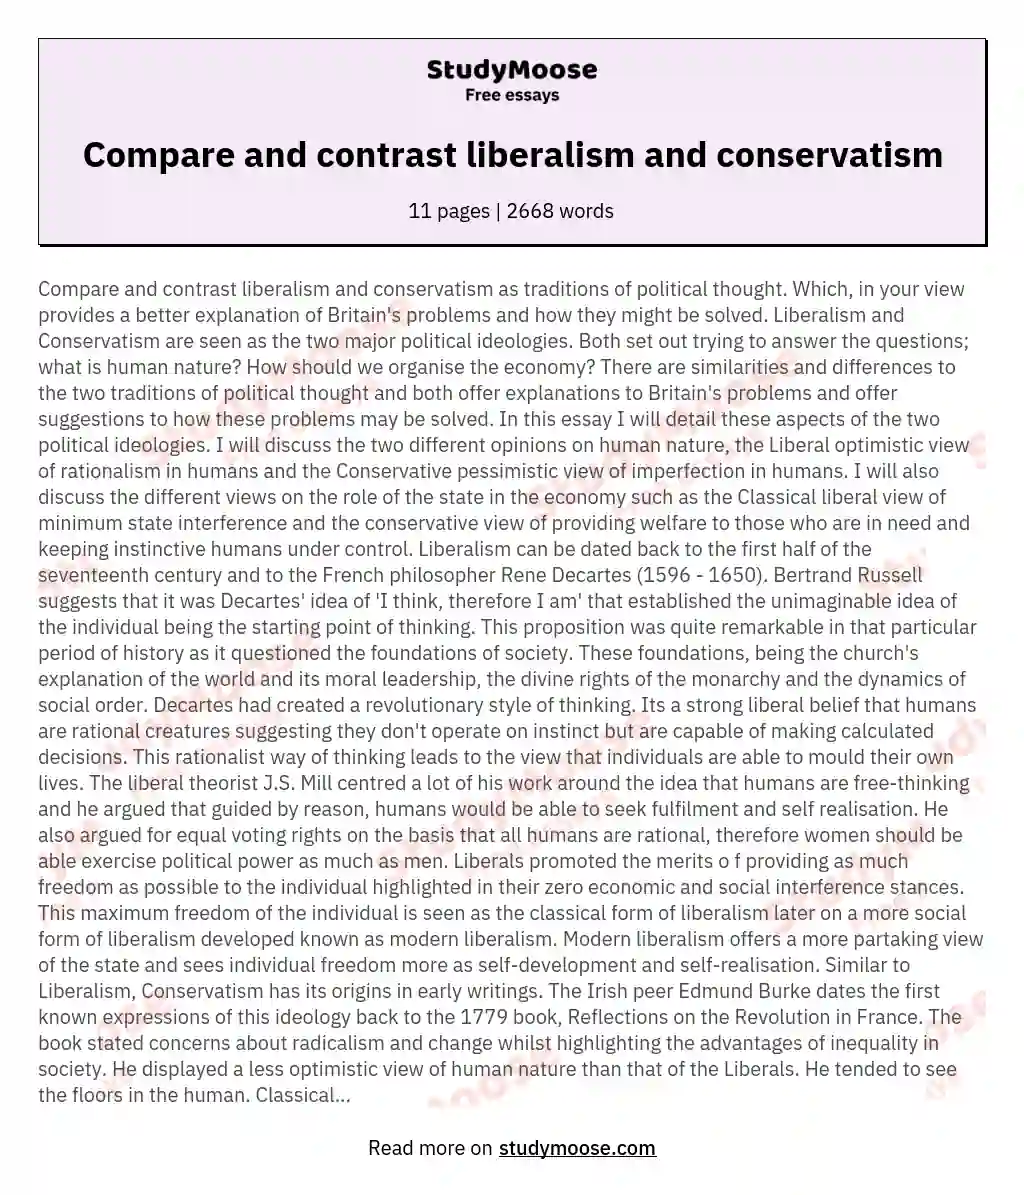 Compare and contrast liberalism and conservatism essay